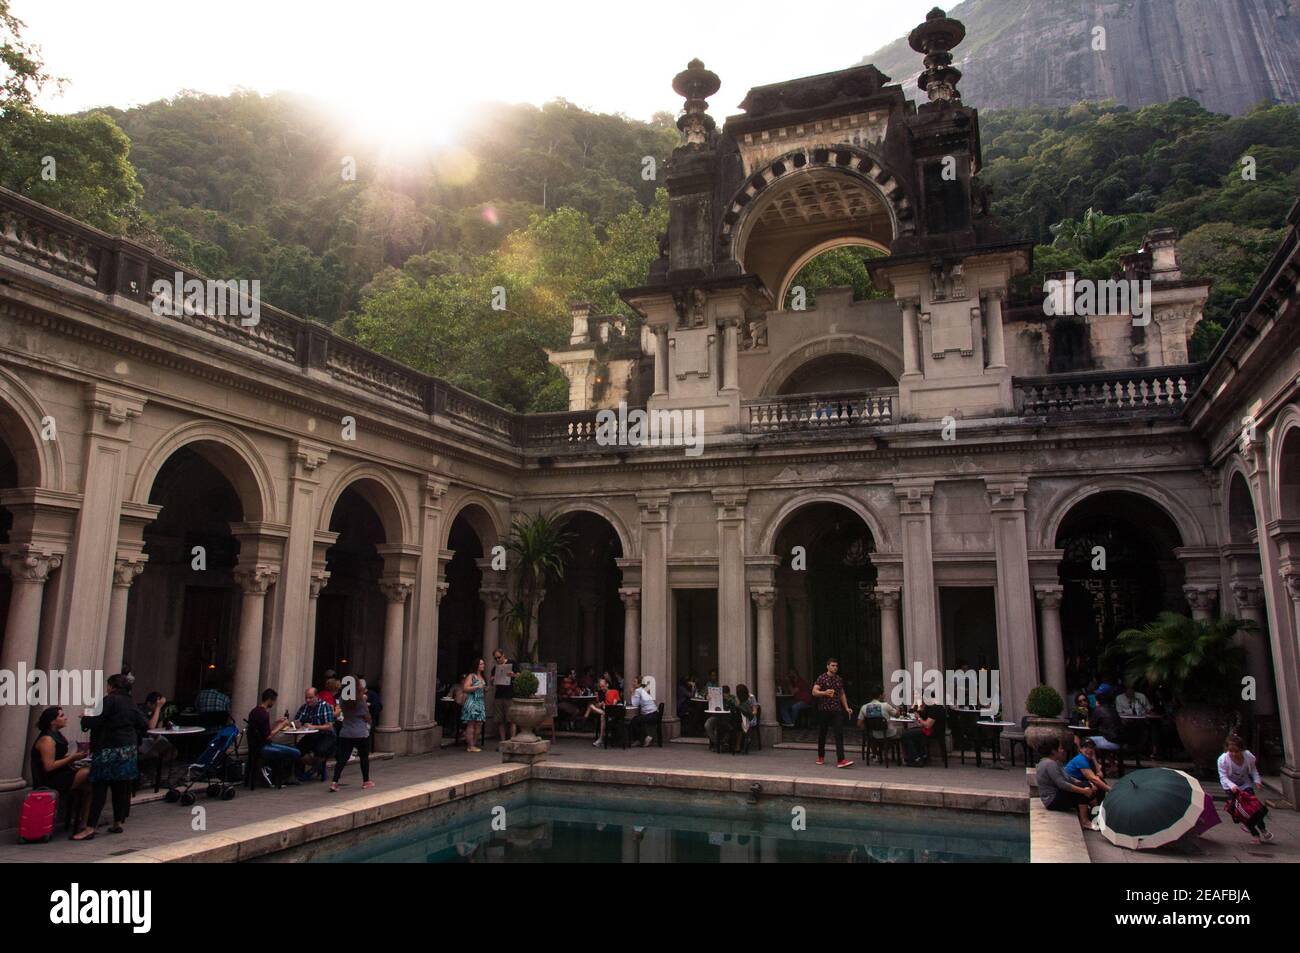 RIO DE JANEIRO, BRAZIL - JUNE 21, 2015: Courtyard of the mansion of Parque Lage. Visual Arts School and a cafe are open to the public. Stock Photo